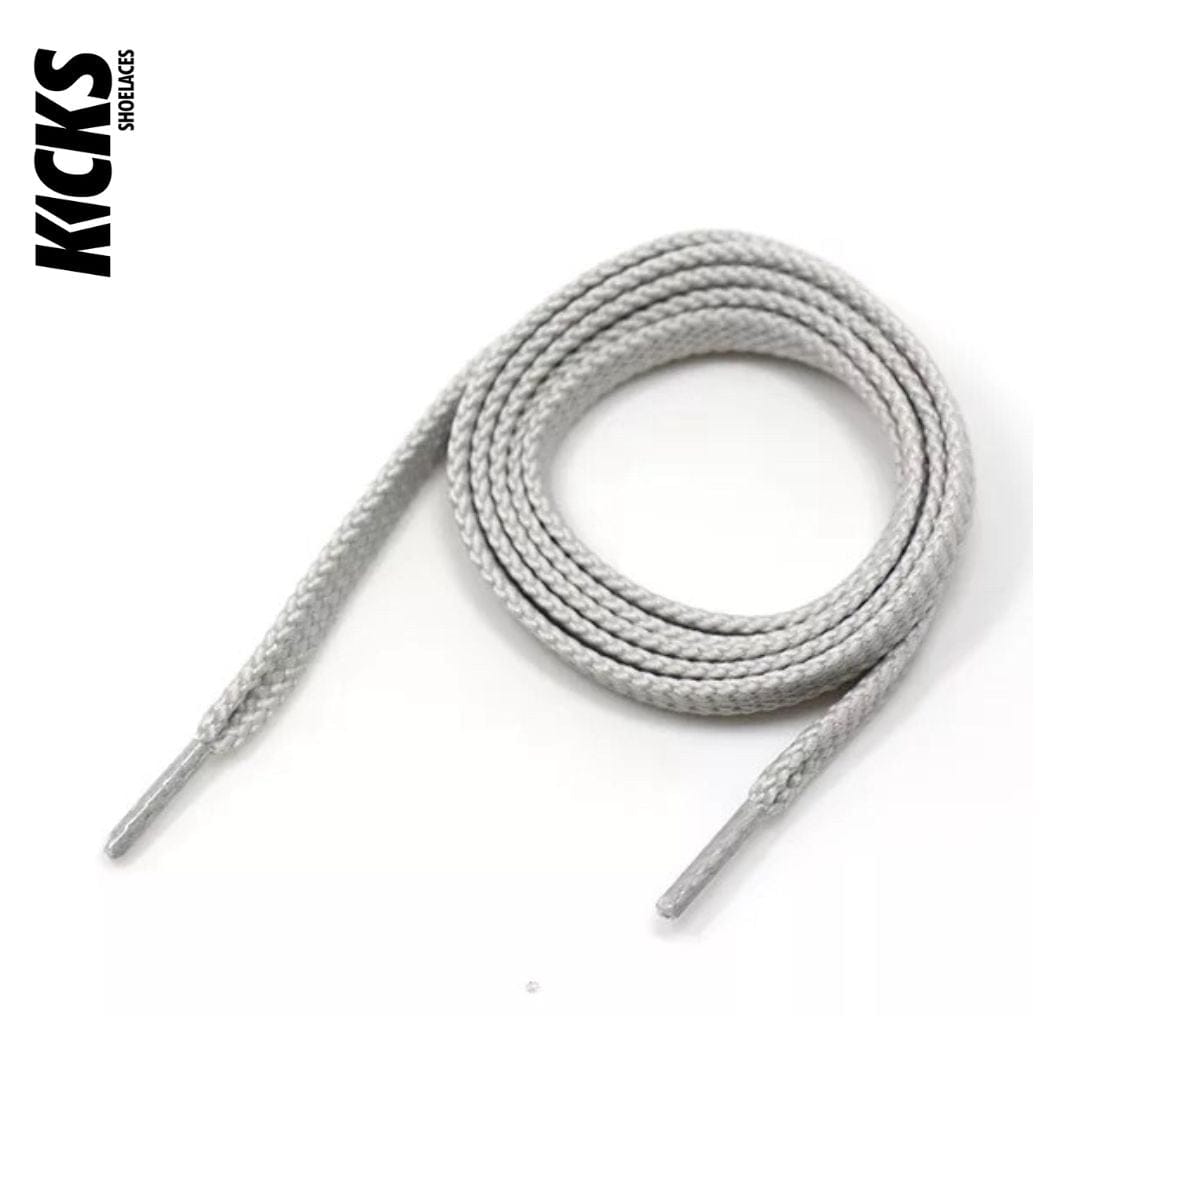 White Grey Replacement New Balance Laces for New Balance Shoes by Kicks Shoelaces